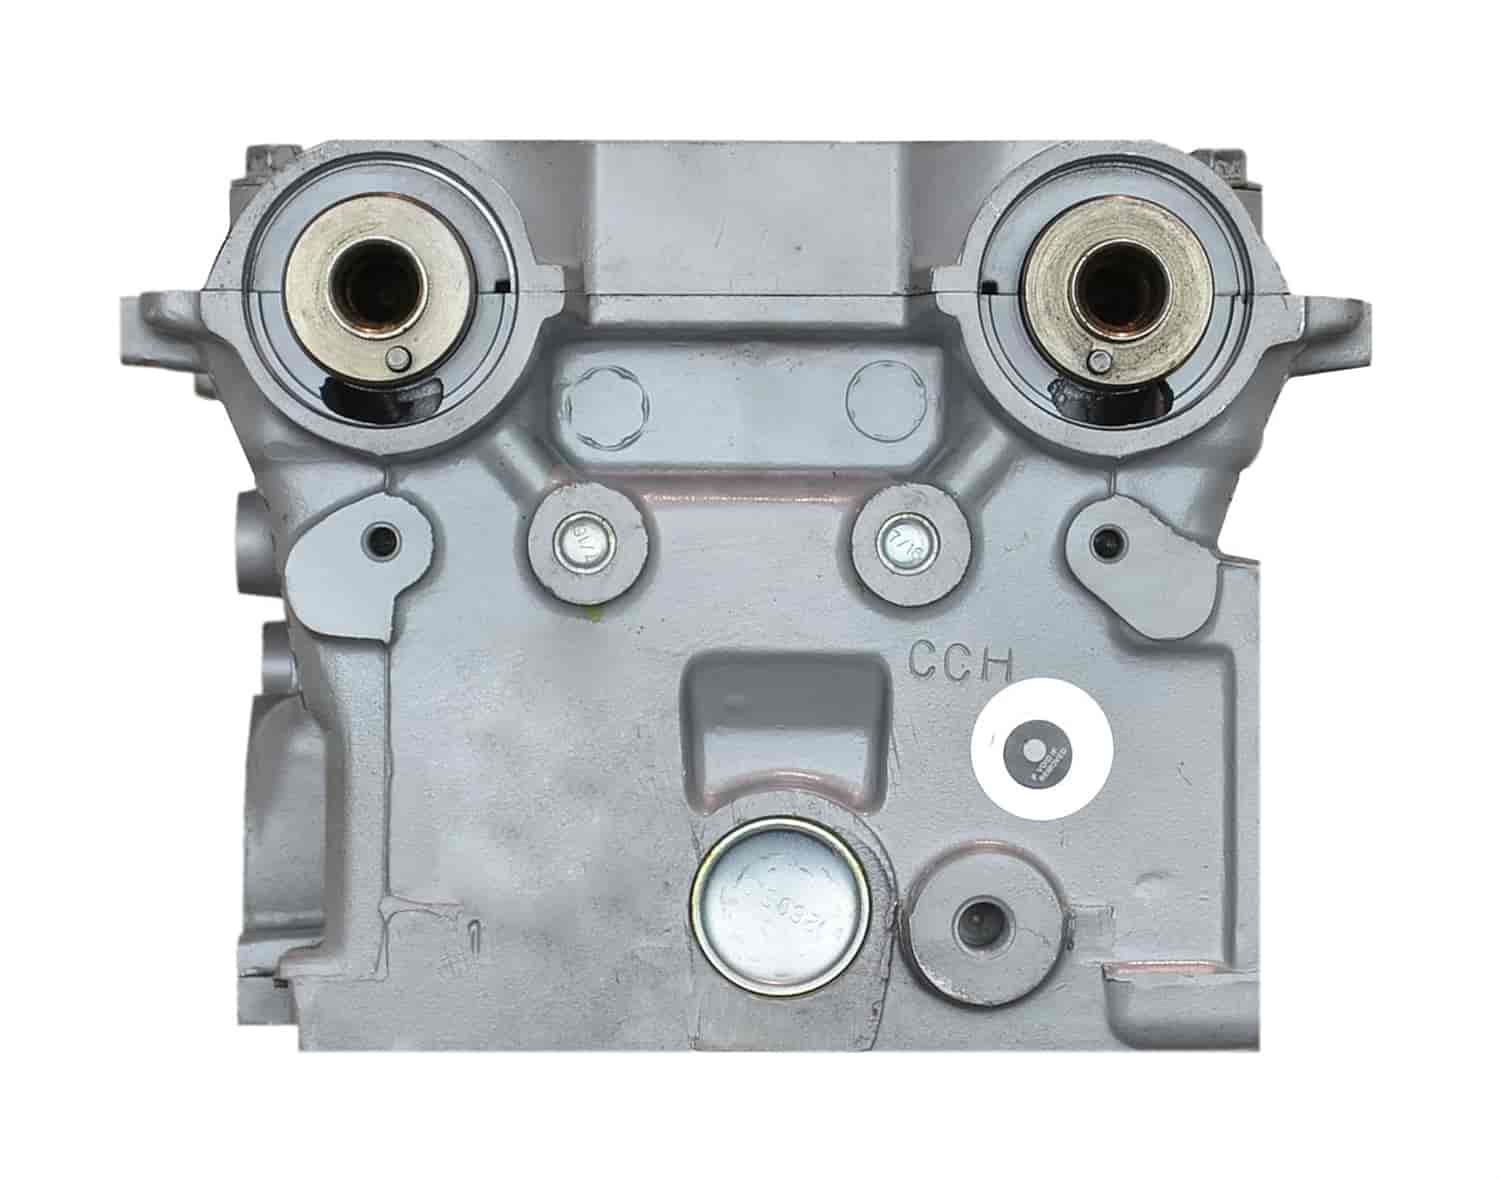 Remanufactured Cylinder Head for 1998-2000 Chrysler/Dodge/Plymouth with 2.4L L4